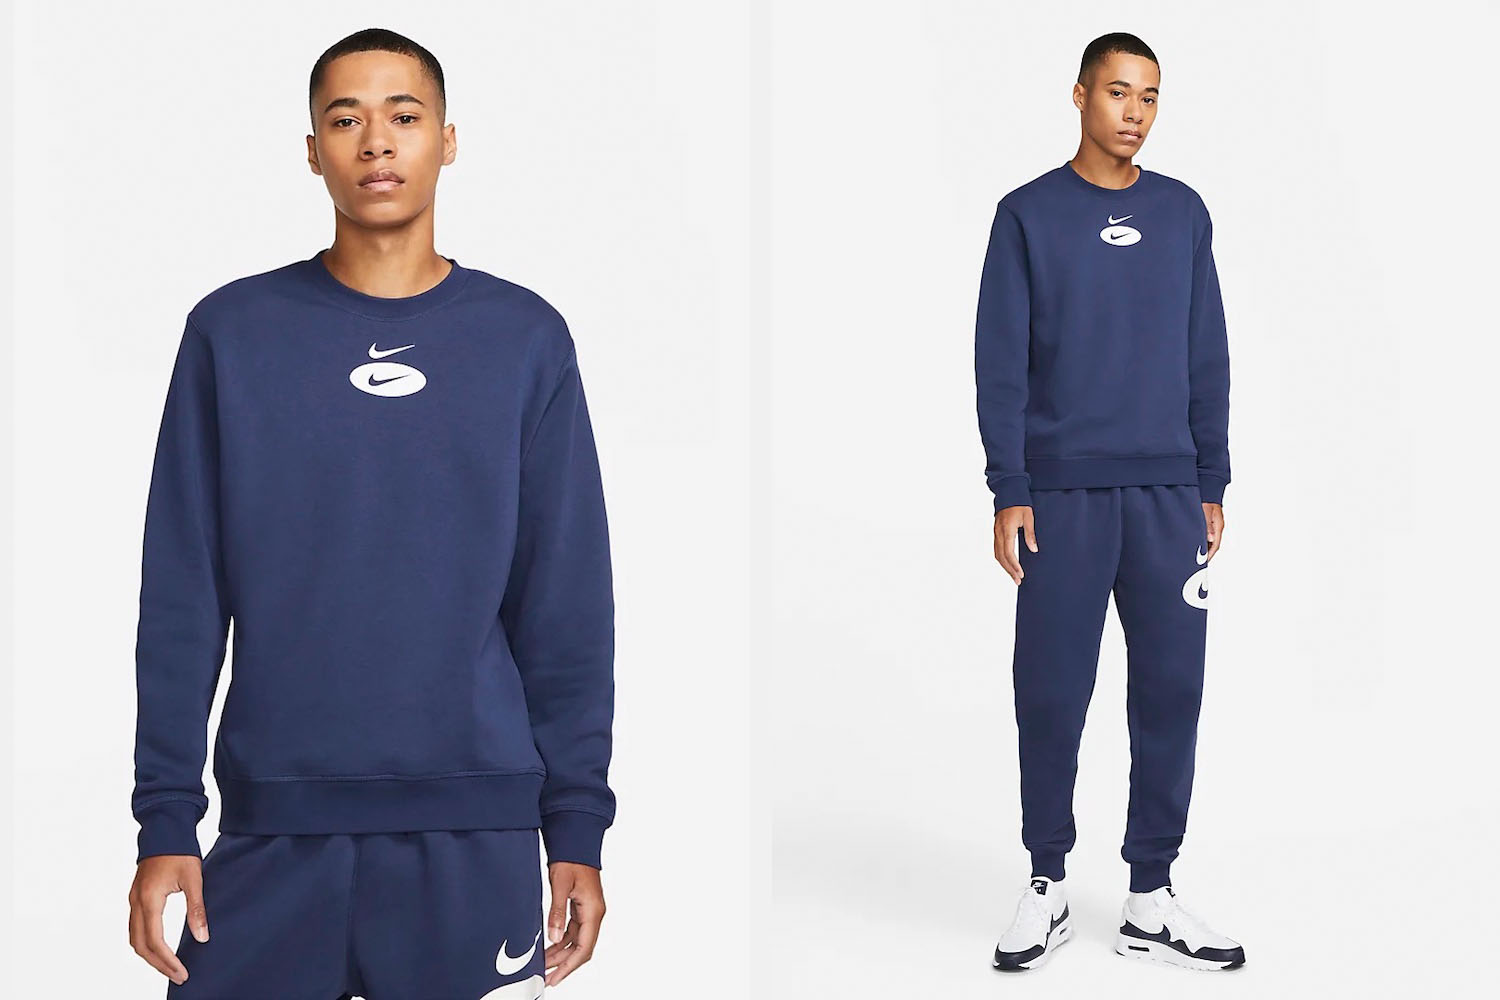 two shots of a Nike model in a blue crewneck on a white background